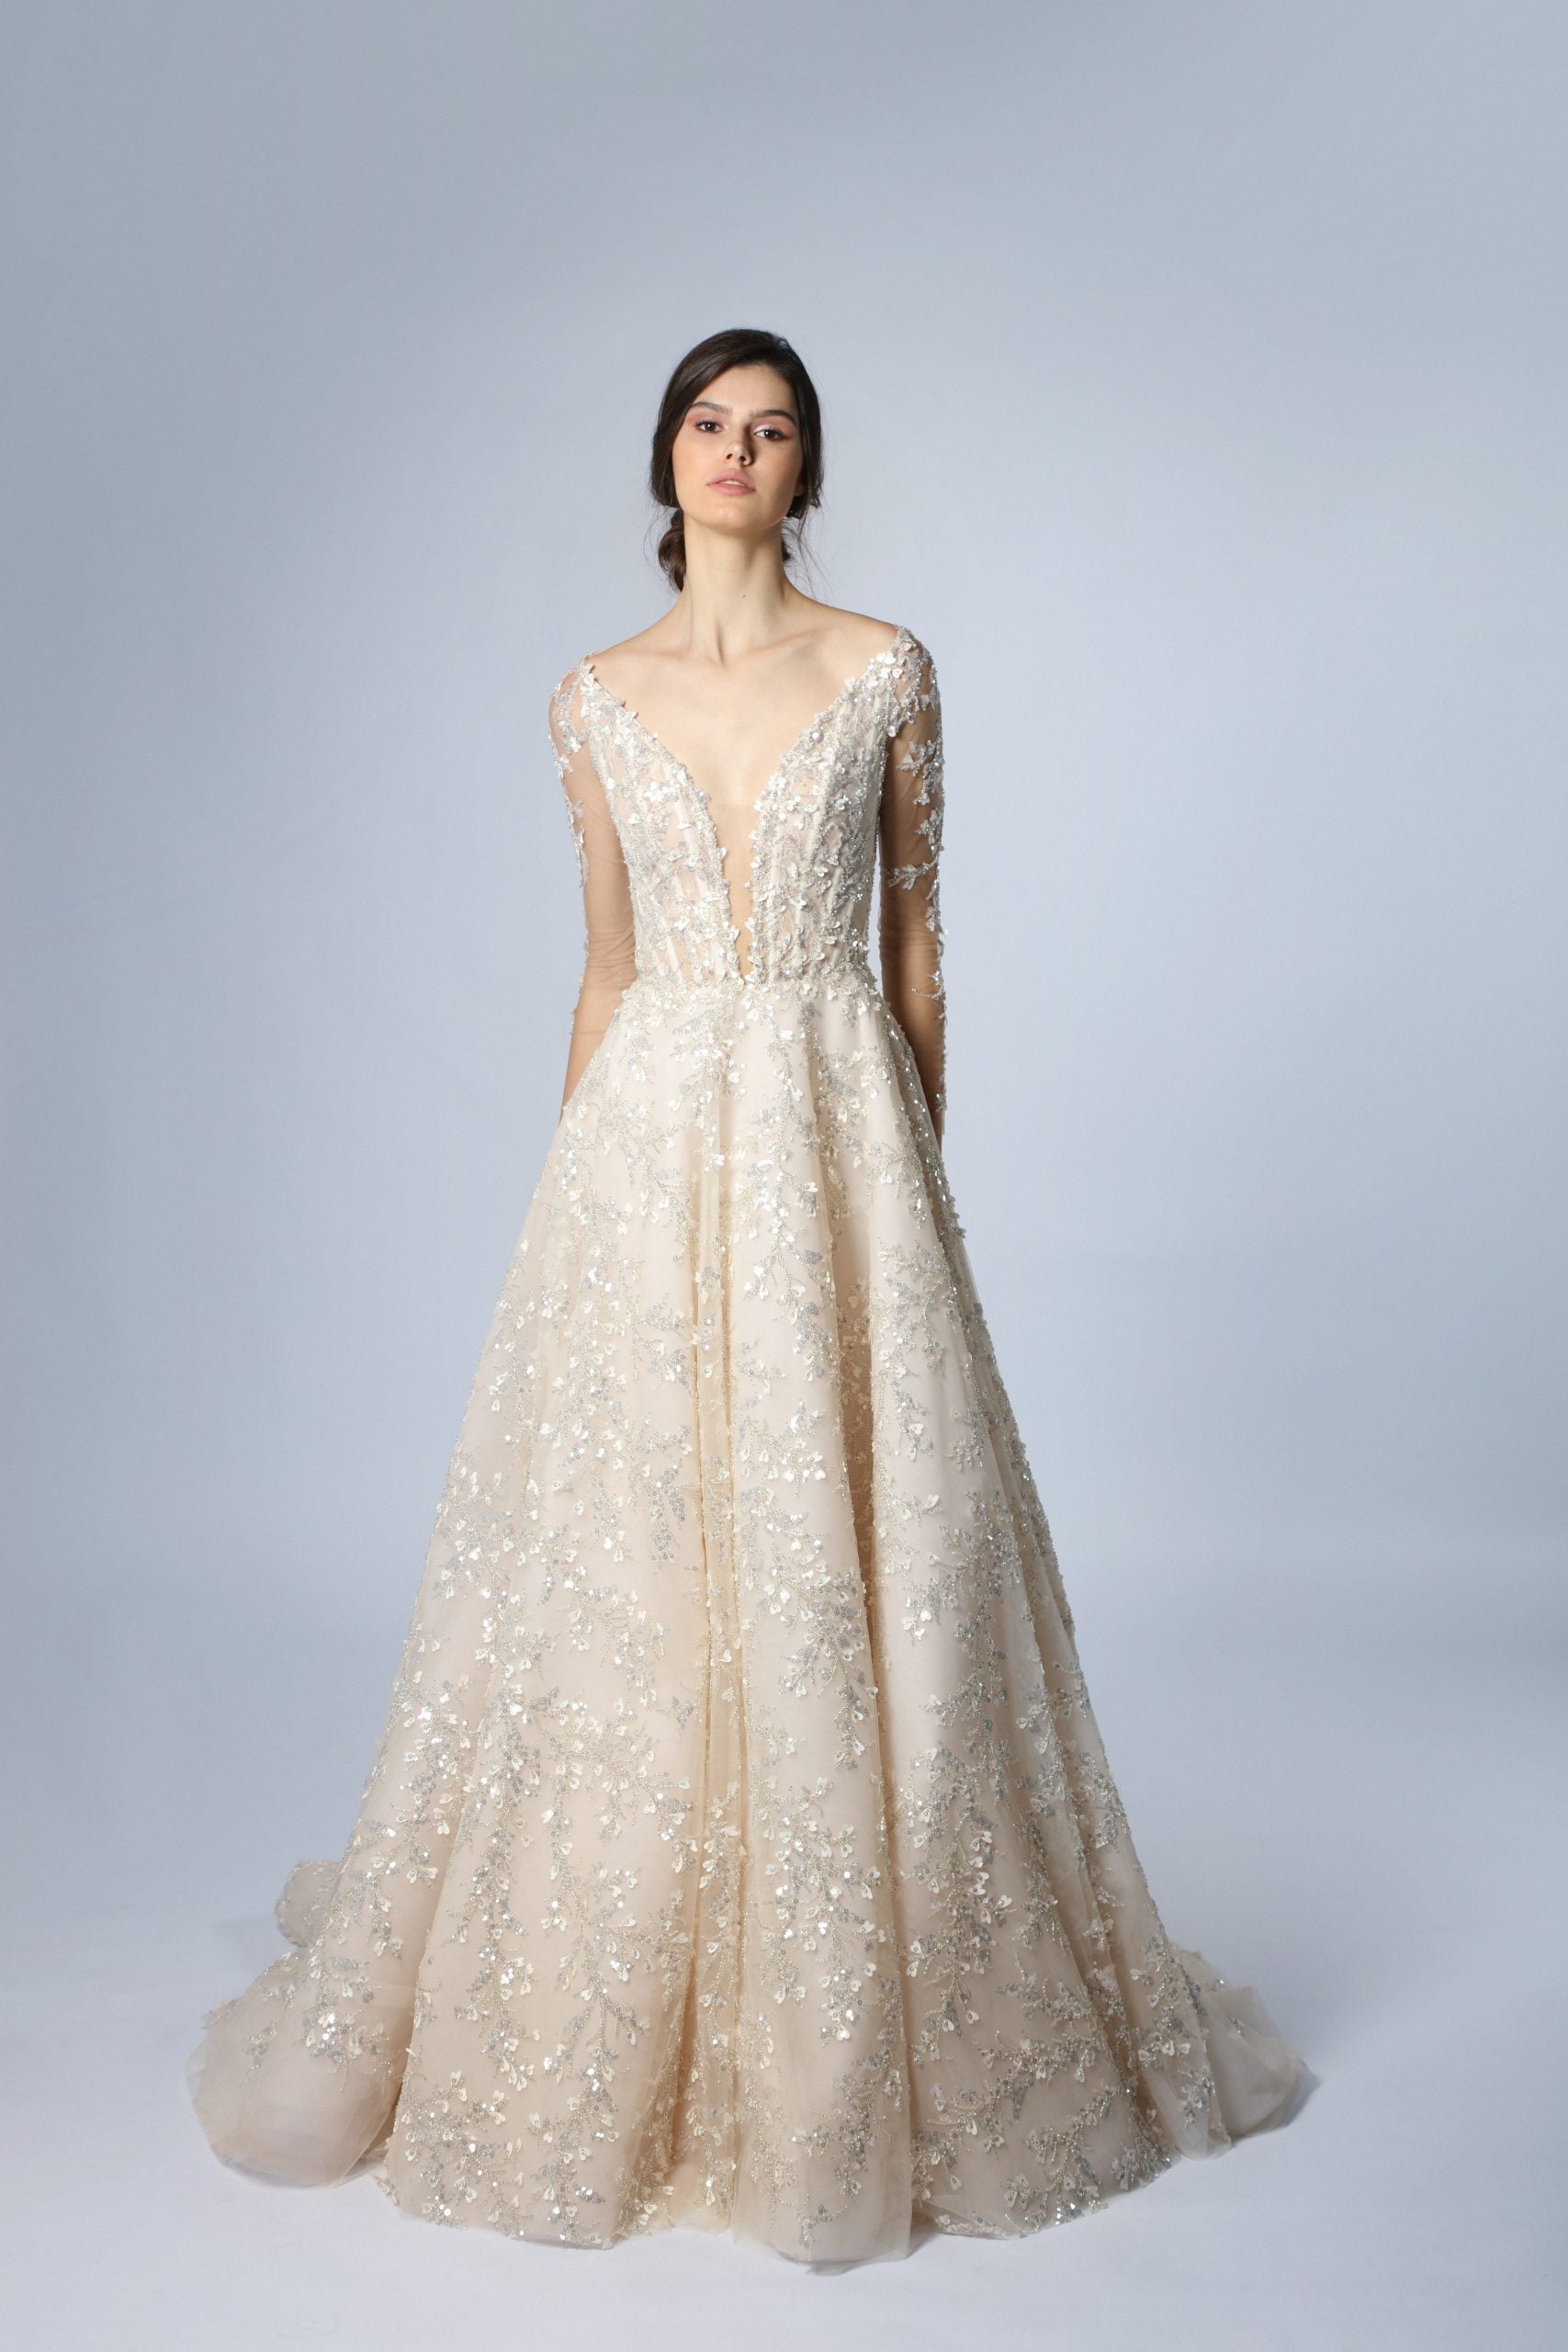 Illusion Long Sleeve A-Line Gown With Organic Embroidery by Tony Ward - Image 1